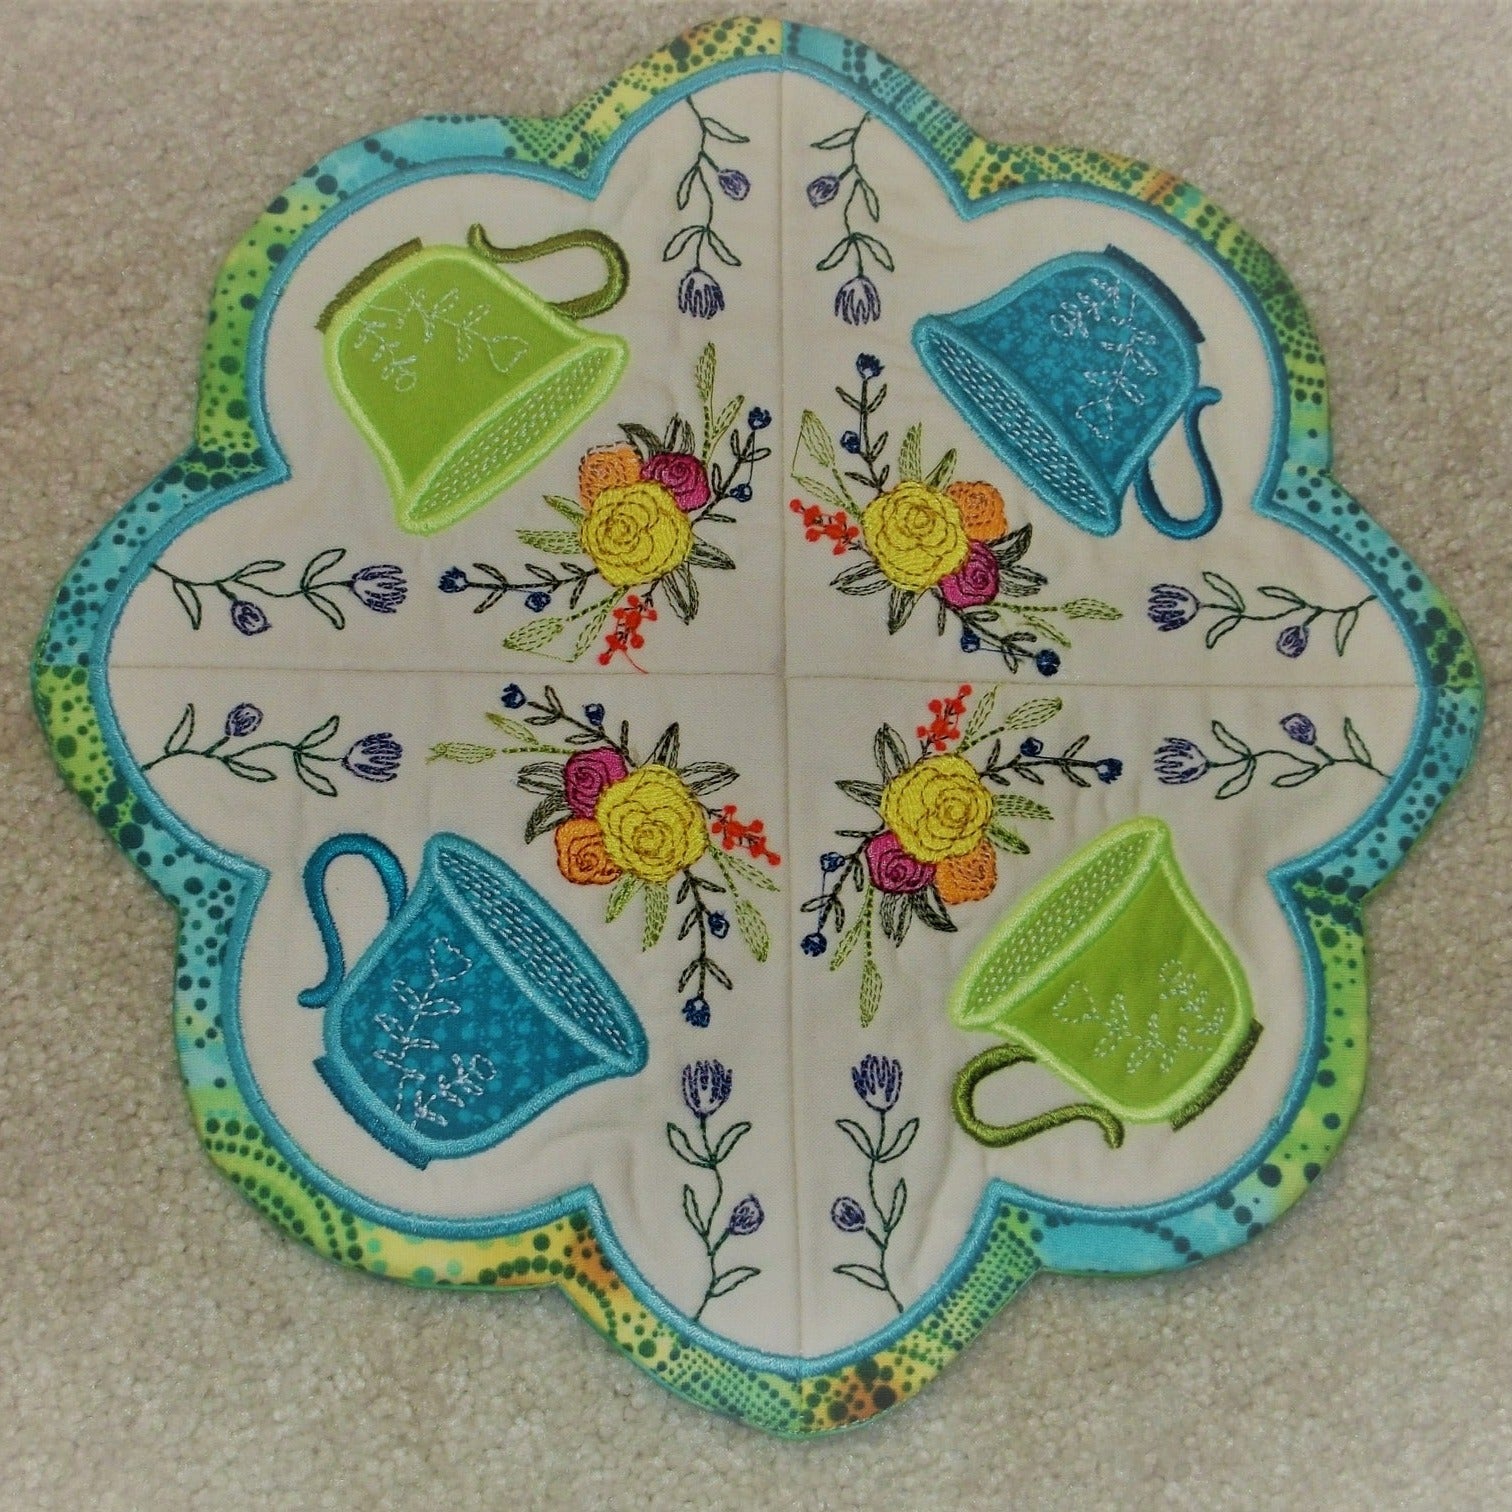 Teacup Table Centre 4x4 5x5 6x6 7x7 8x8 - Sweet Pea In The Hoop Machine Embroidery Design